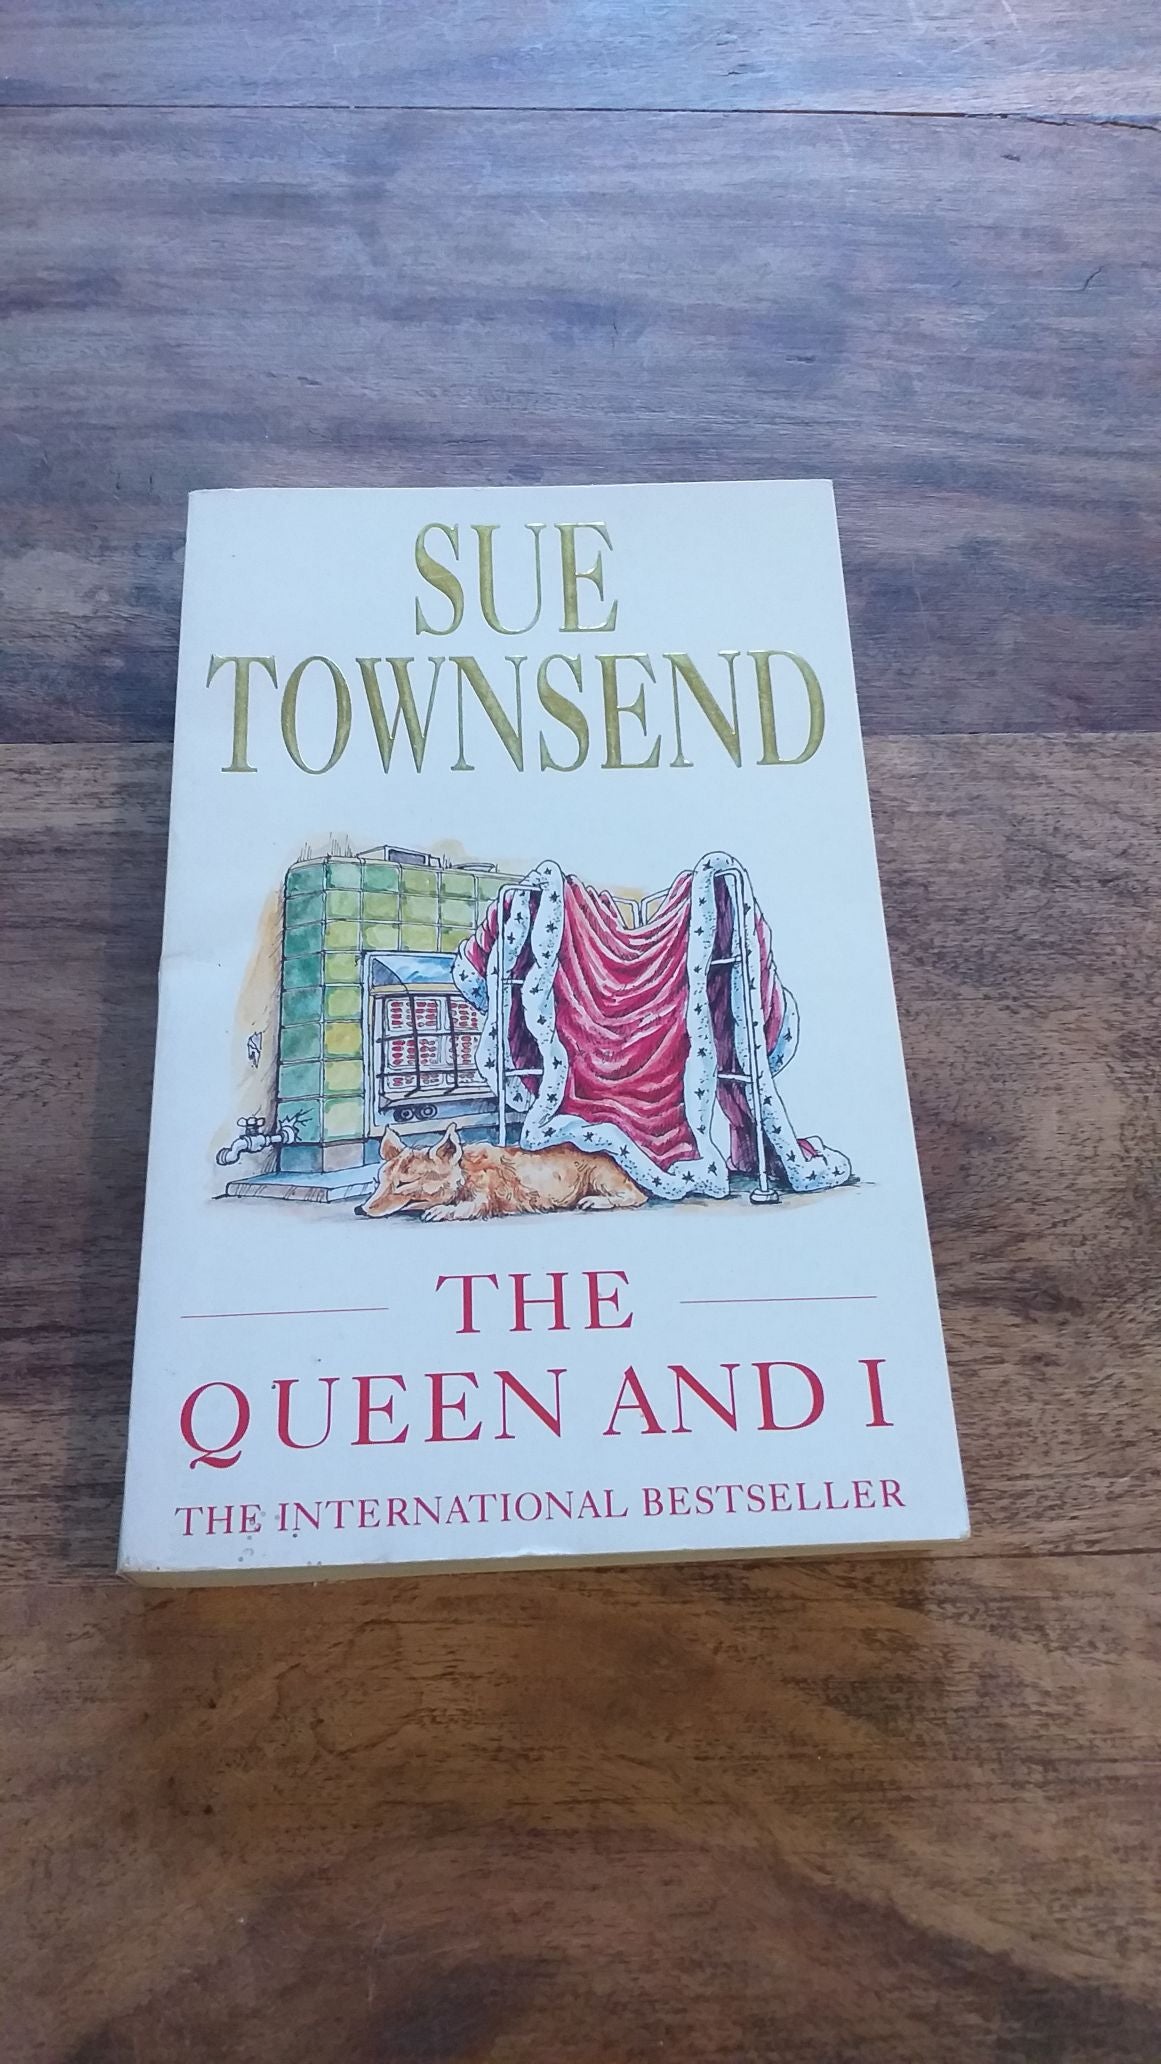 The Queen and I - 1993 by Sue Townsend